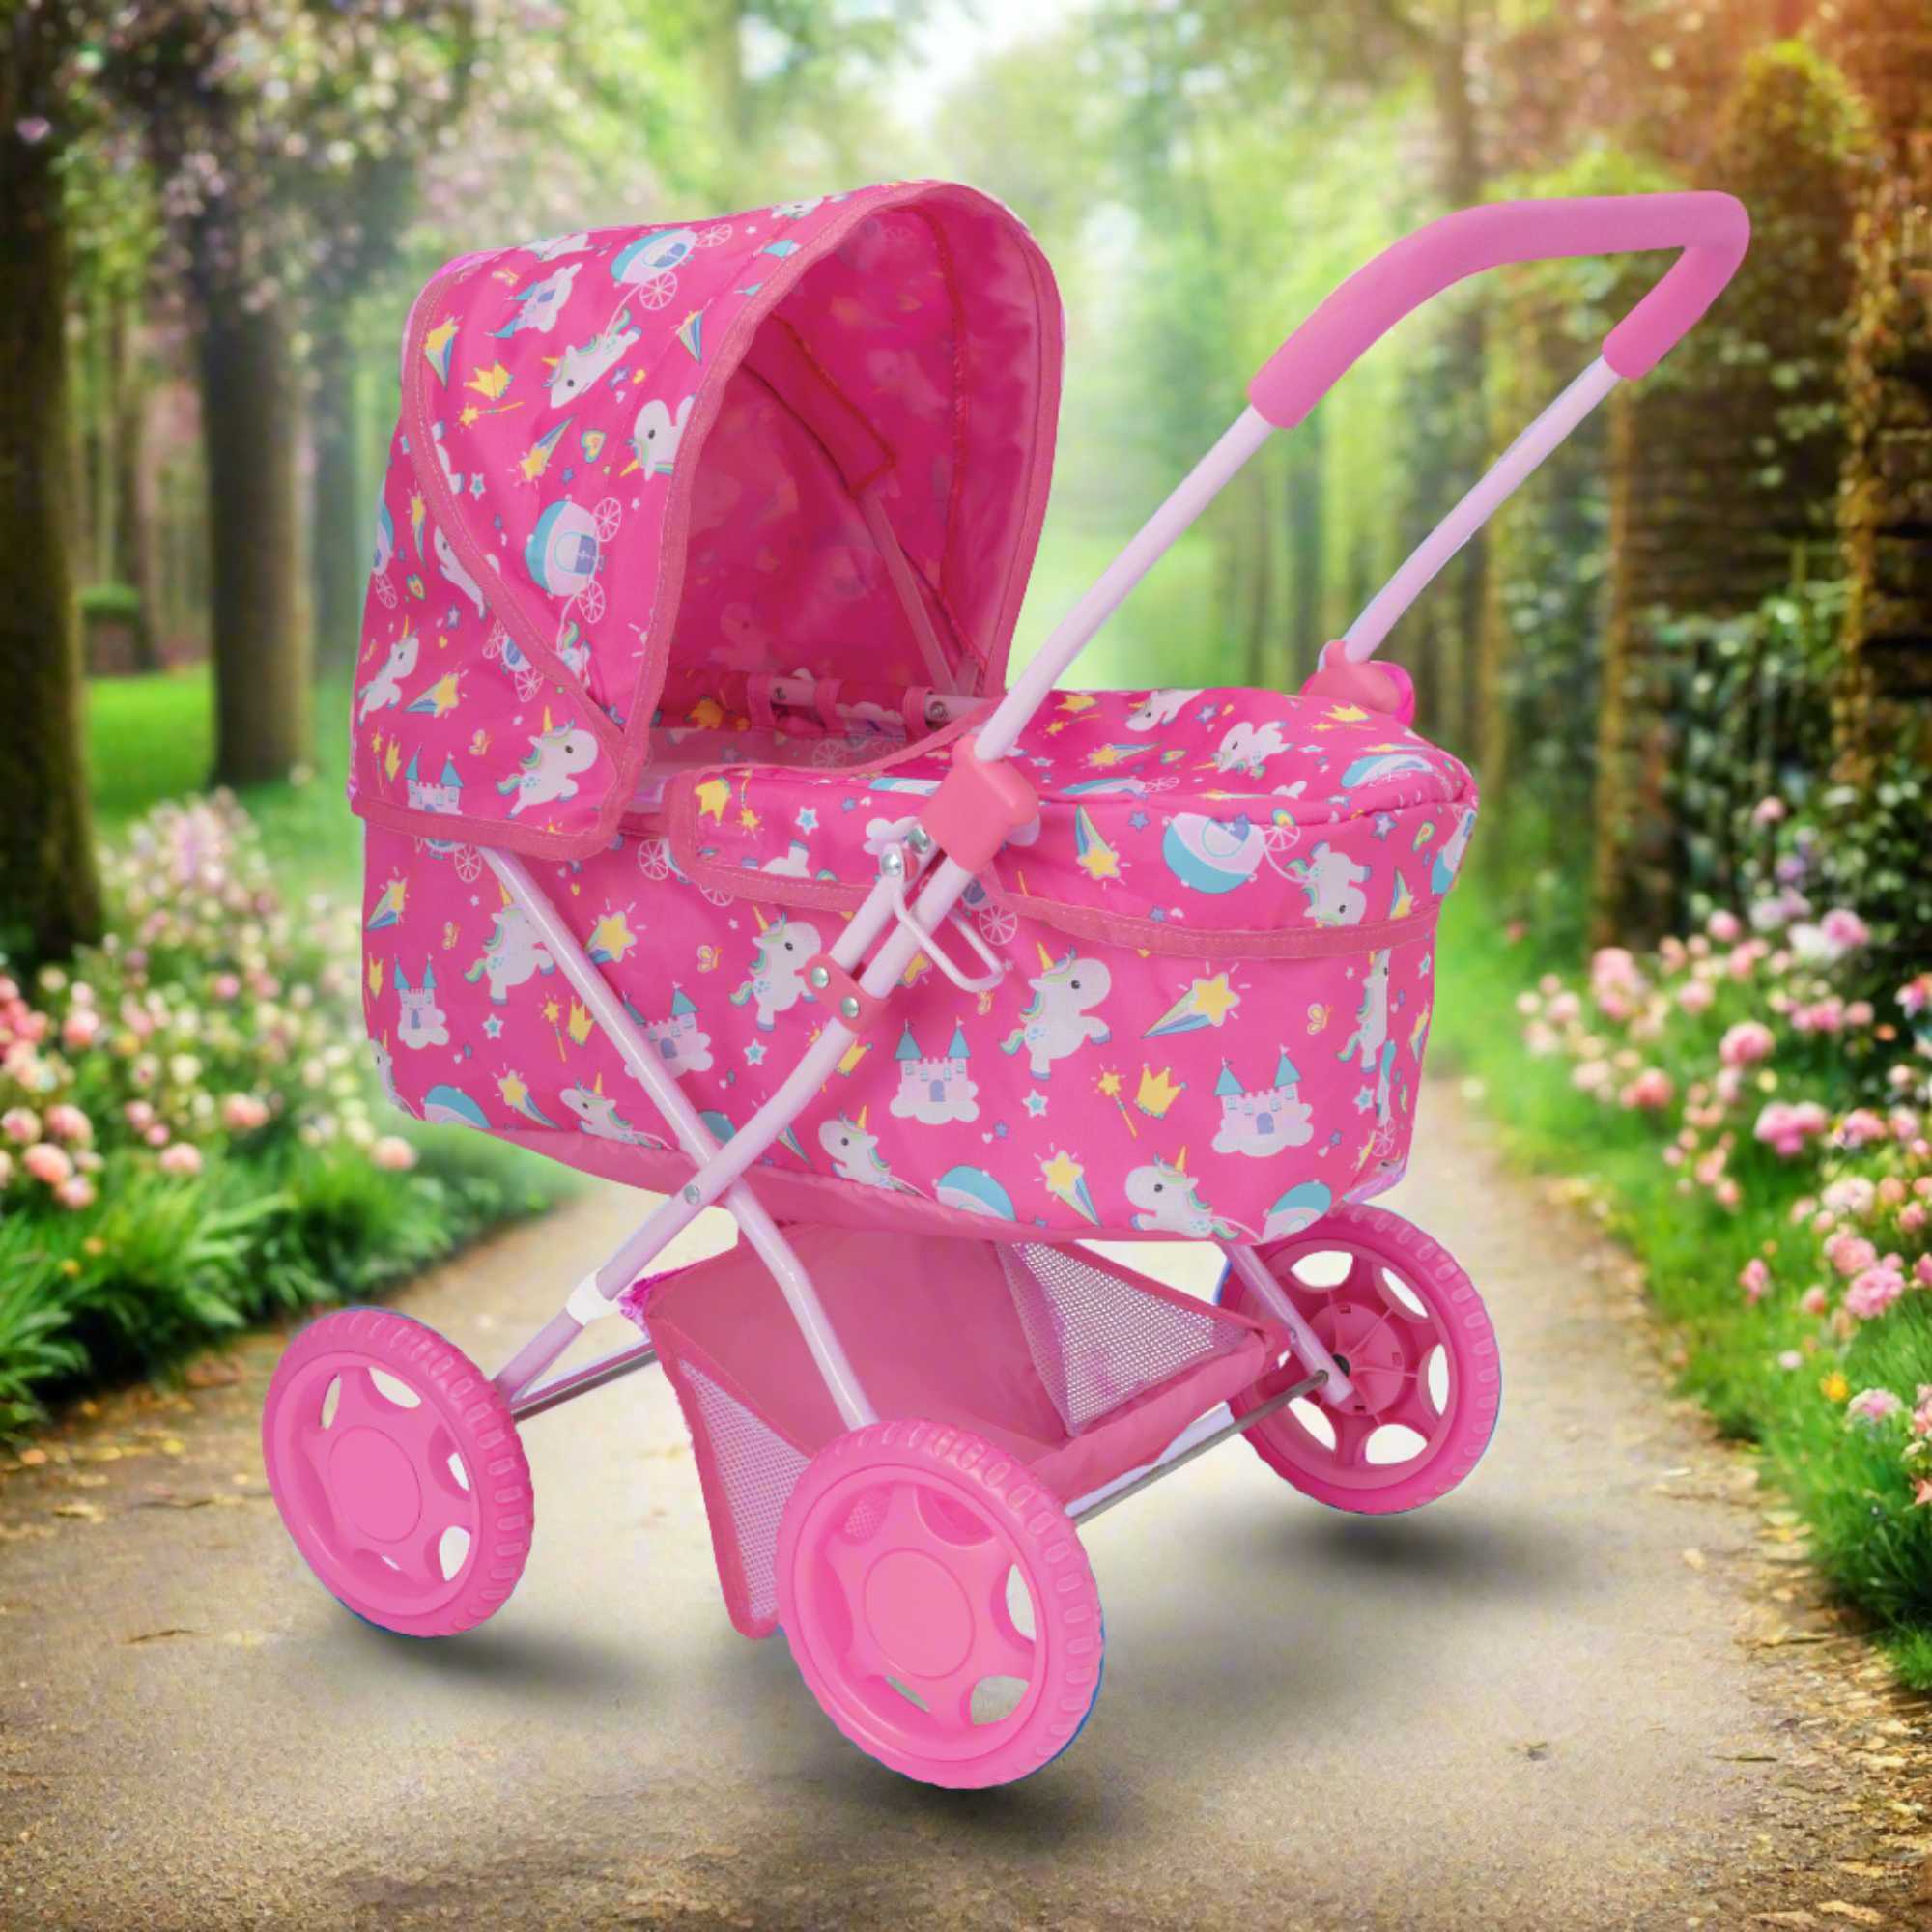 Adorable doll pram featuring a charming unicorn pattern, perfect for young children's imaginative play. Sturdy construction and easy maneuverability make it ideal for indoor and outdoor adventures. Compatible with various dolls and plush toys